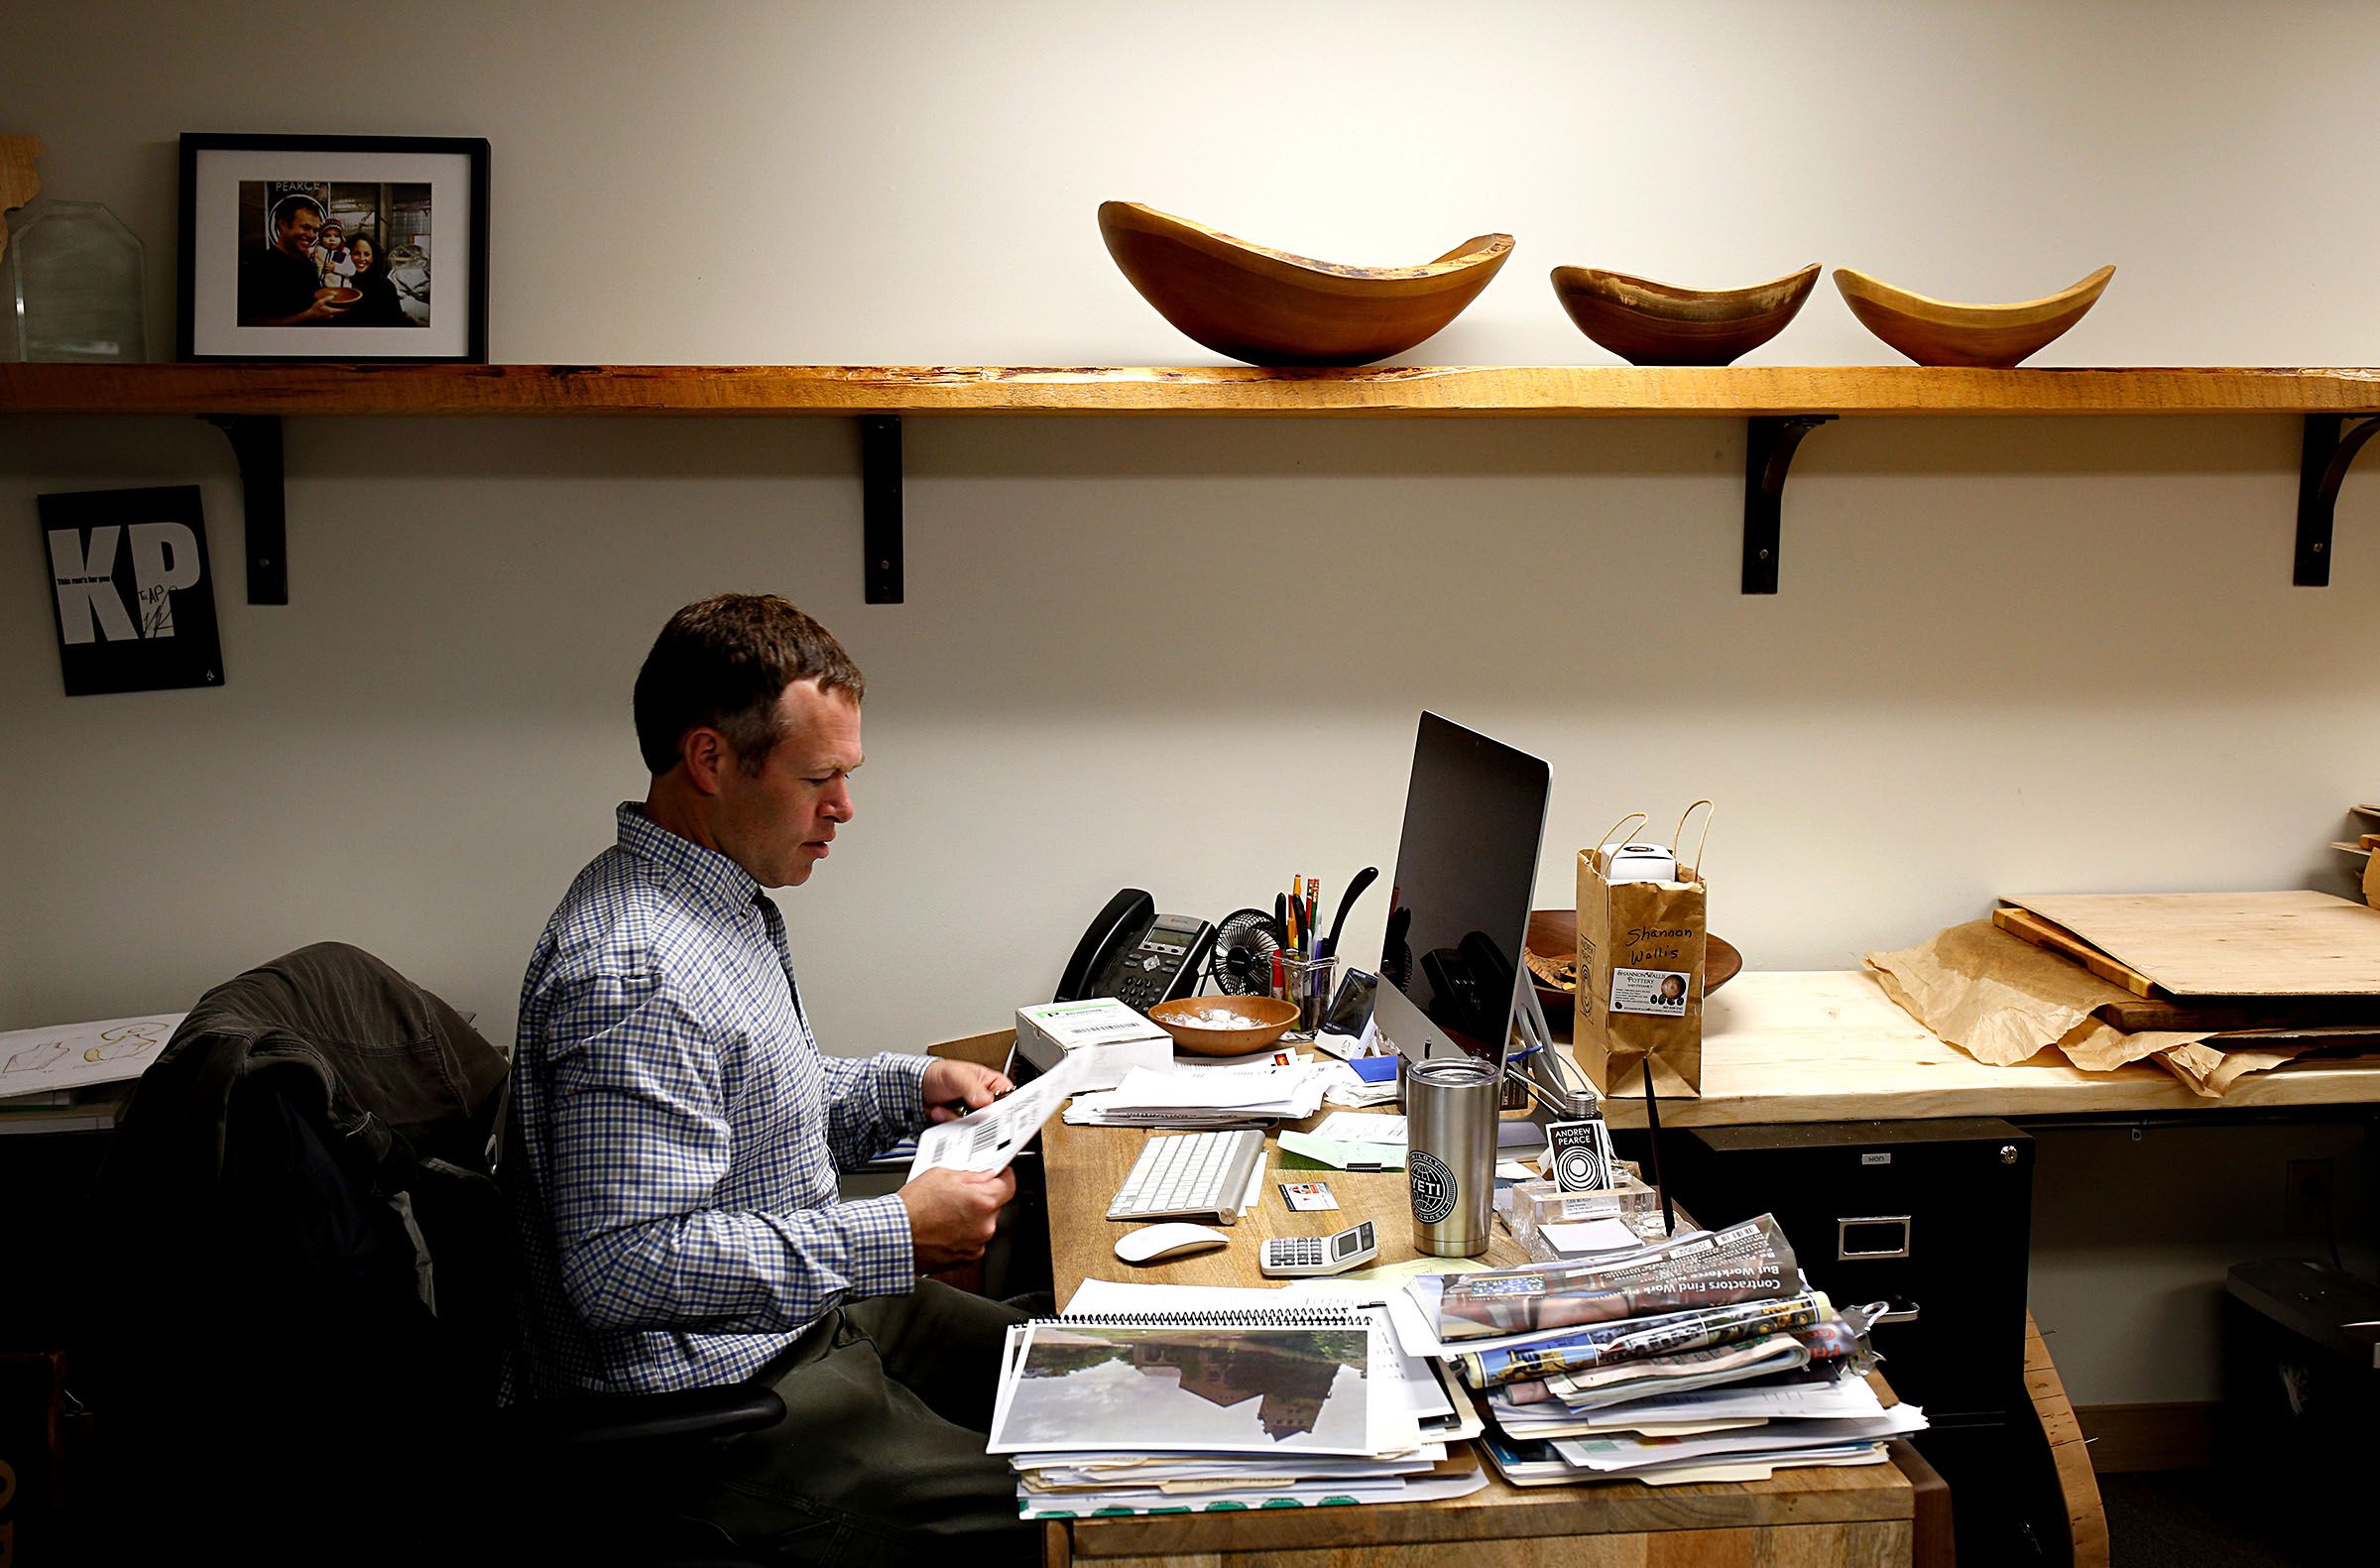 Andrew Pearce works in the office at his manufacturing facility and showroom in Hartland, Vt., on April 12, 2017. Pearce started the business in 2014 in Bethel, Vt. The company made 8,500 bowls last year. (Valley News - Geoff Hansen) Copyright Valley News. May not be reprinted or used online without permission. Send requests to permission@vnews.com.